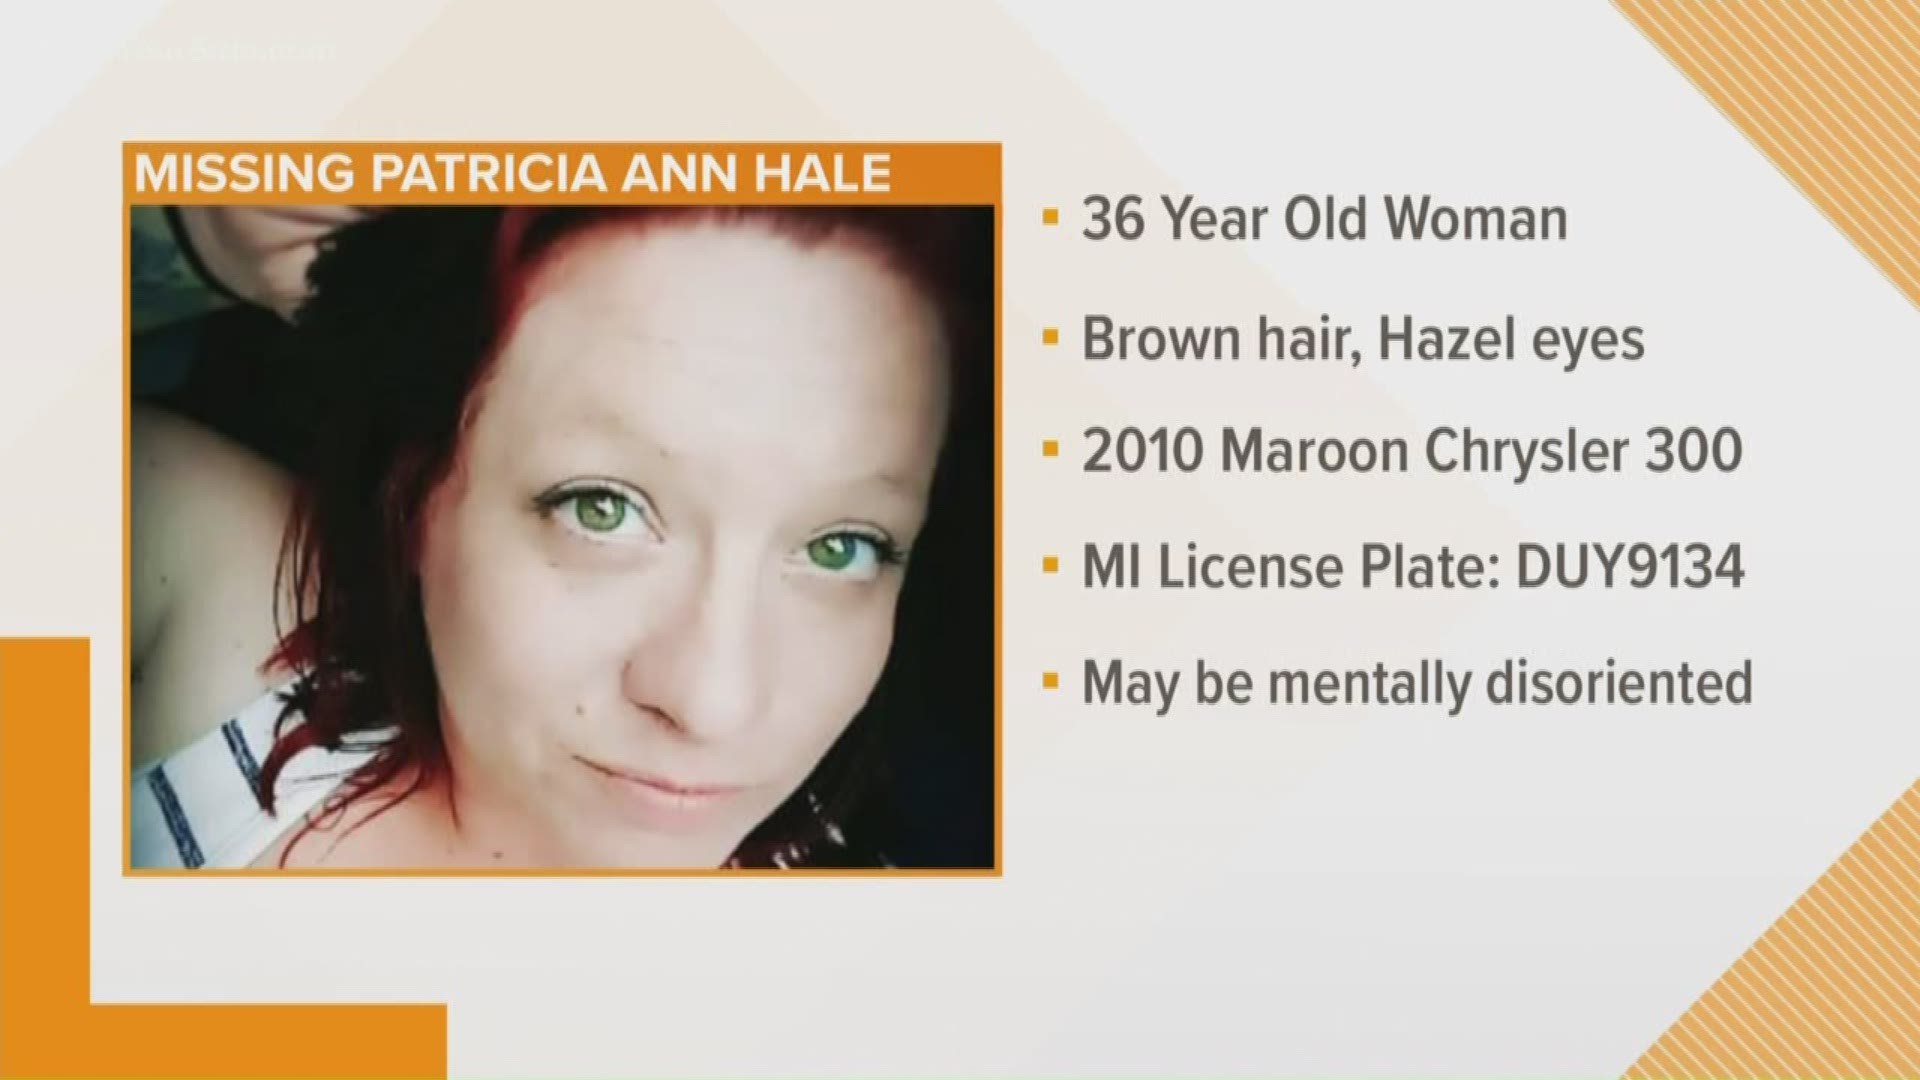 The Kalamazoo Police Department is looking for a woman who "may not recall her name." Patricia Anna Hale was last seen in Parchment on Saturday, Sept. 20.